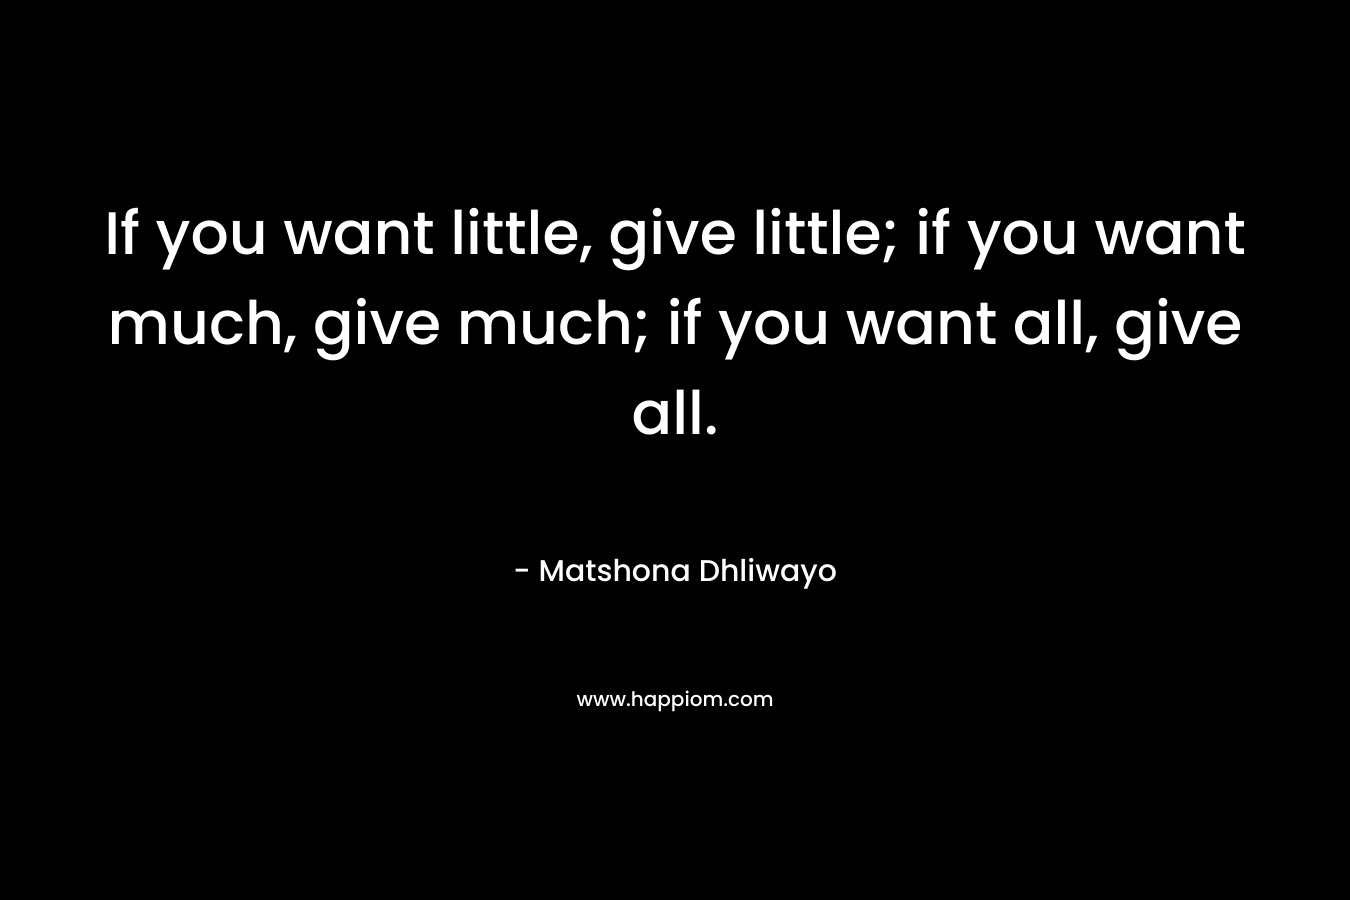 If you want little, give little; if you want much, give much; if you want all, give all.